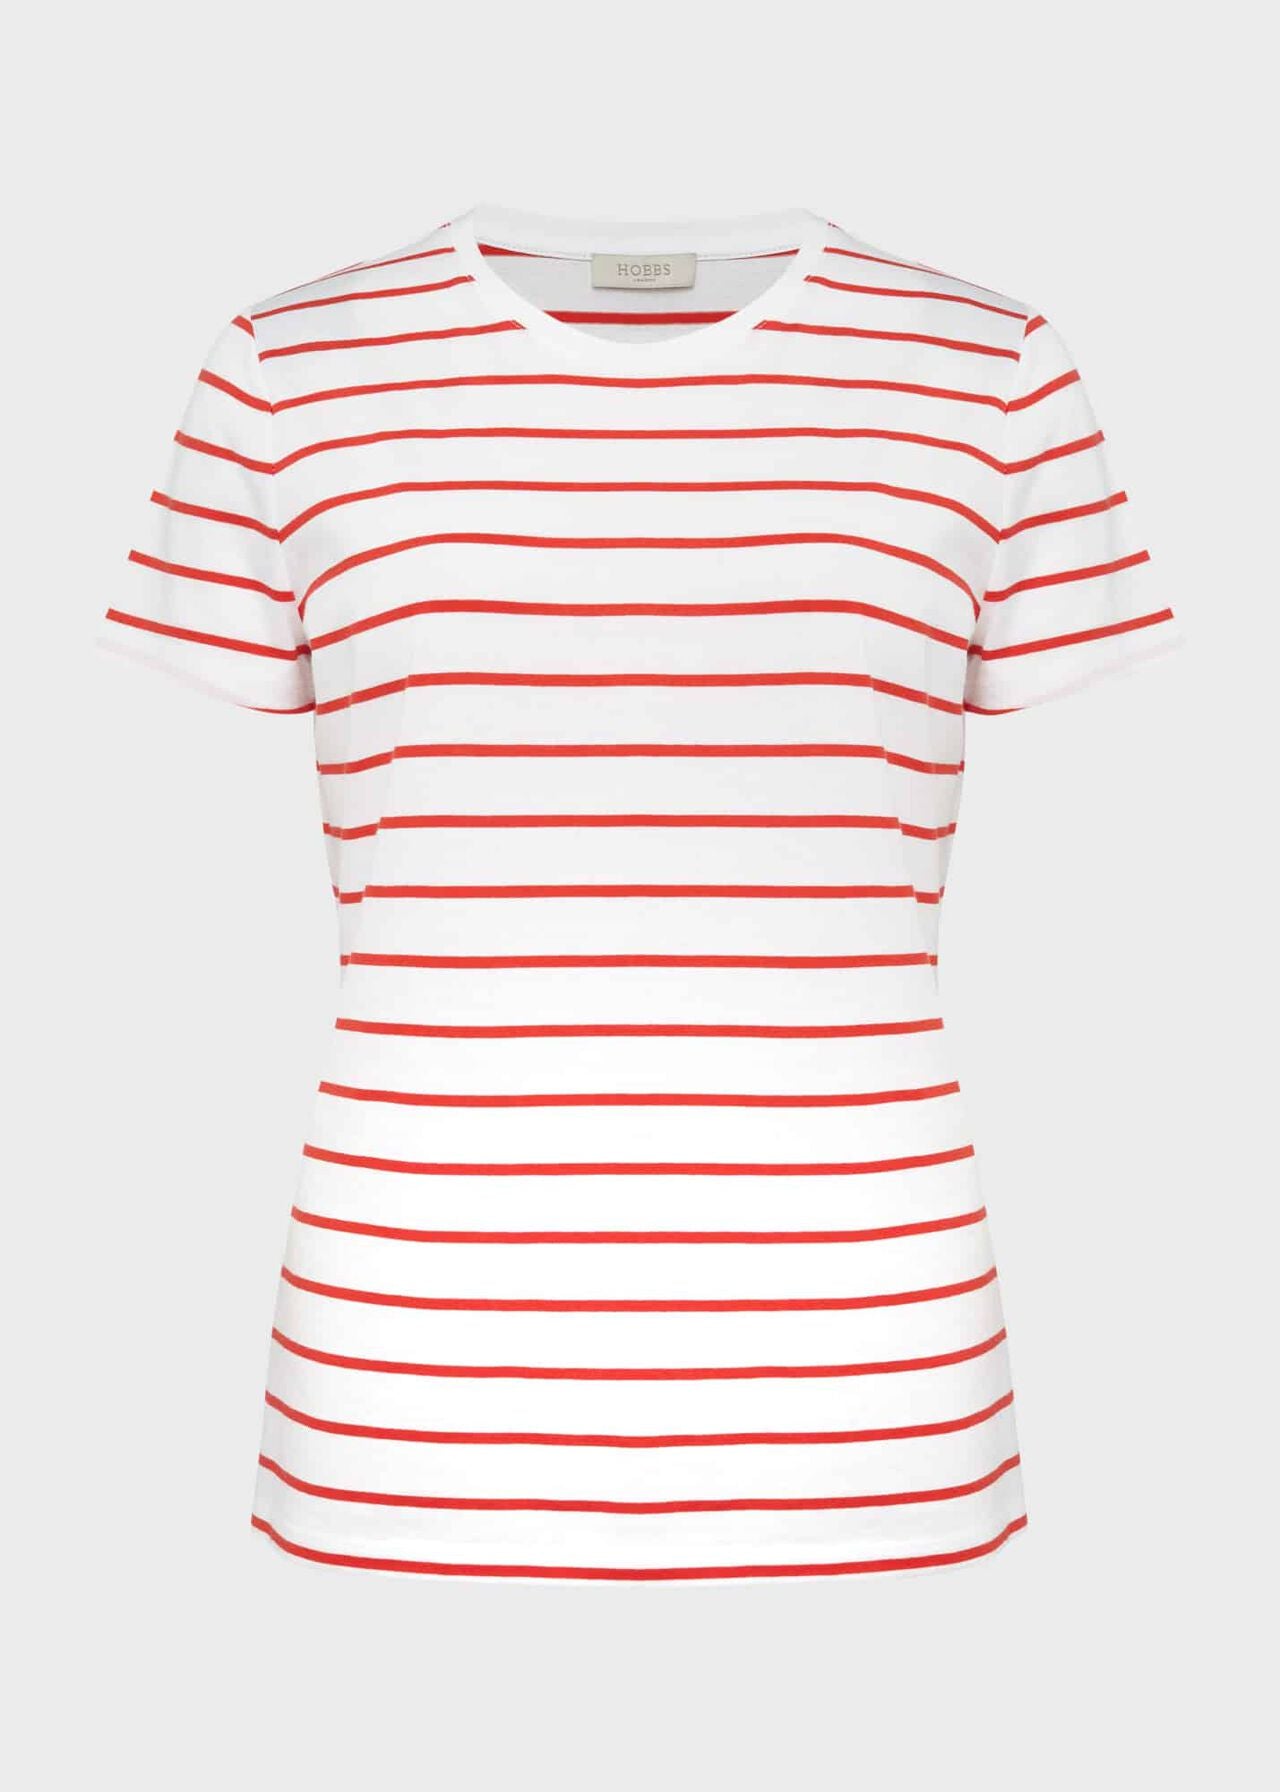 Pixie Striped Tee 0222/2569/1144l00 White-Red